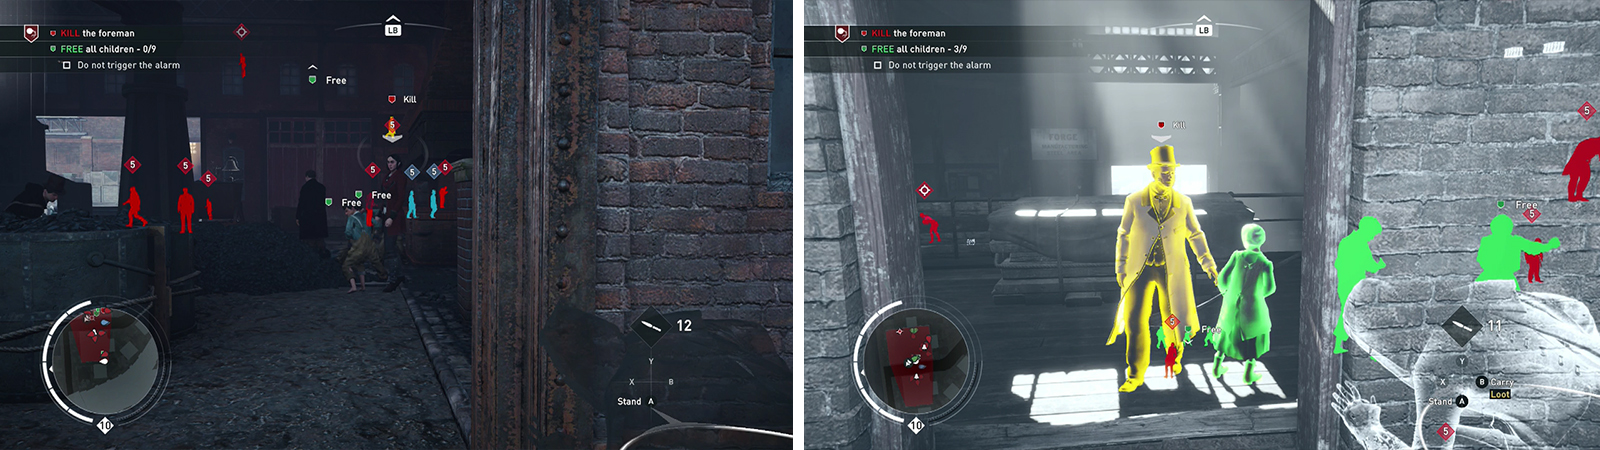 The first group of children is in the western building (left). The foreman can be assassinated from one of the sniper platforms on the main building (right).